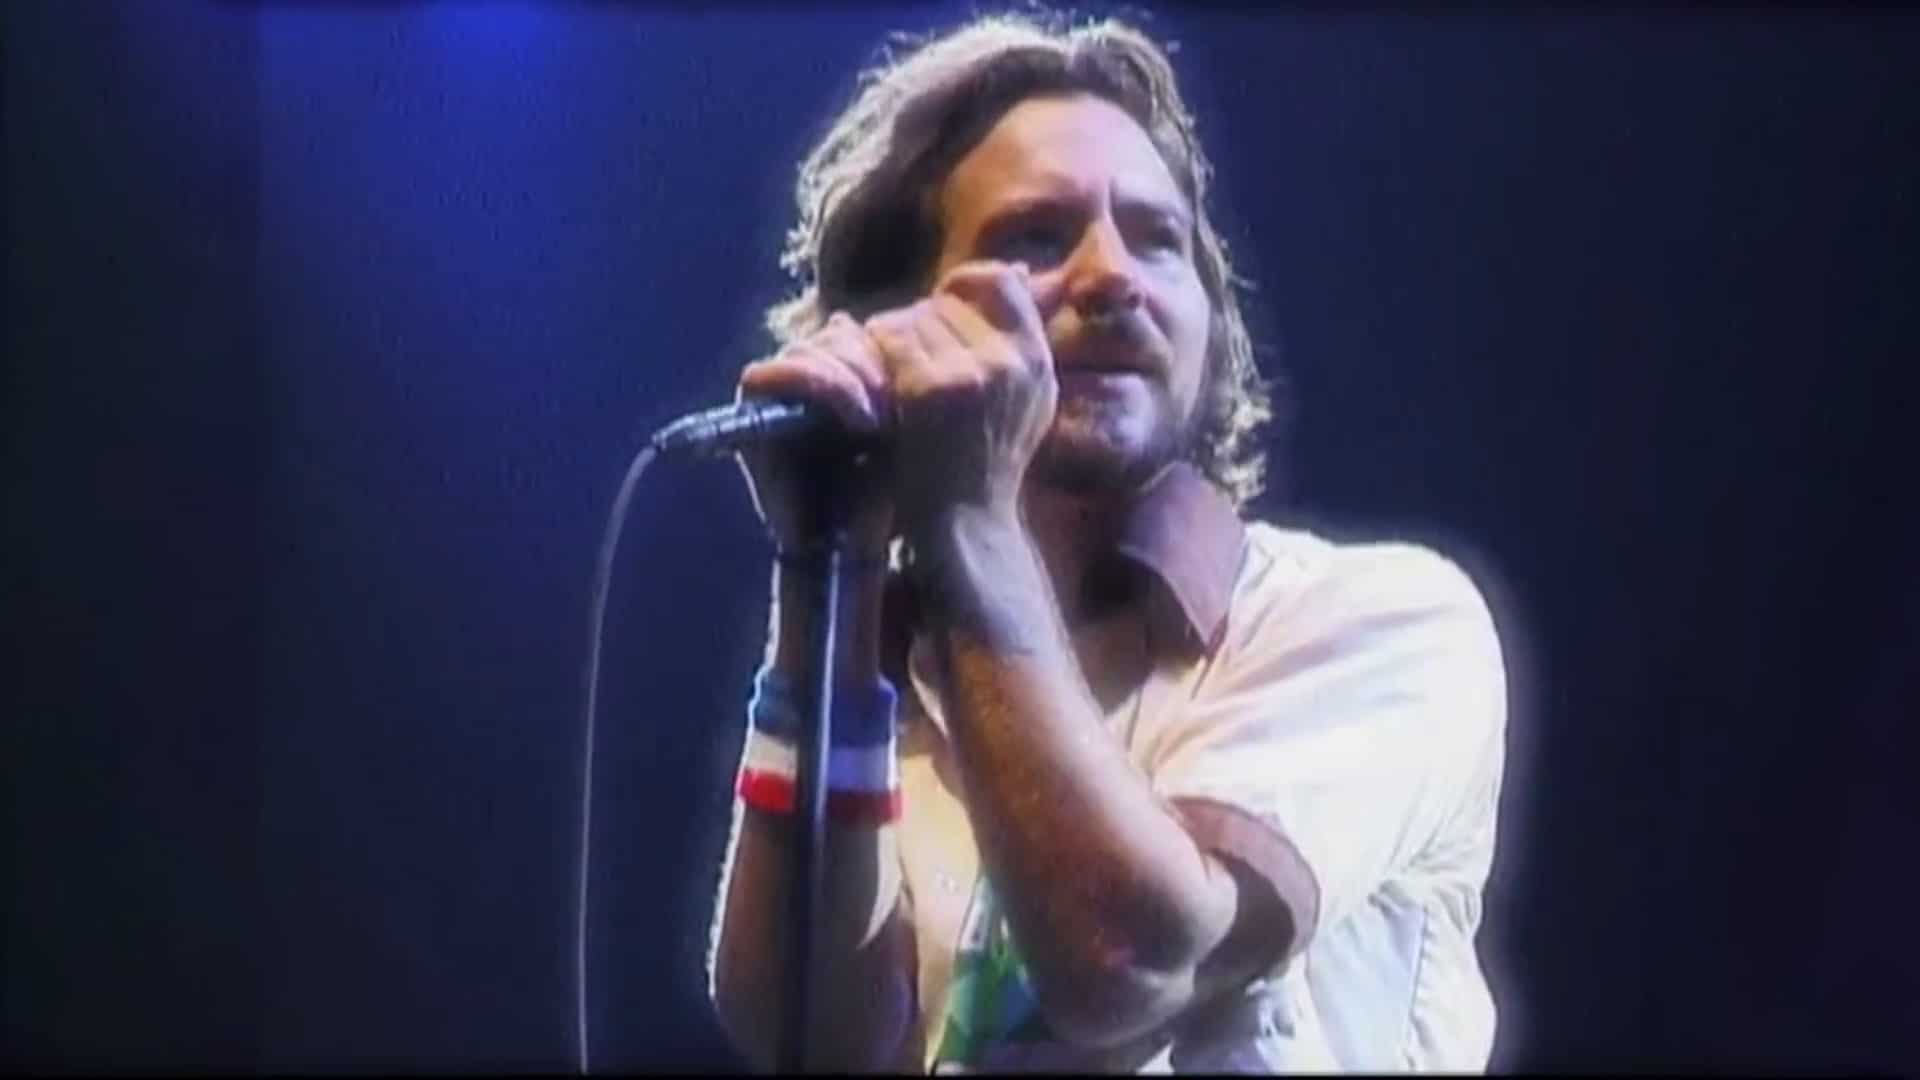 Pearl Jam - Given To Fly